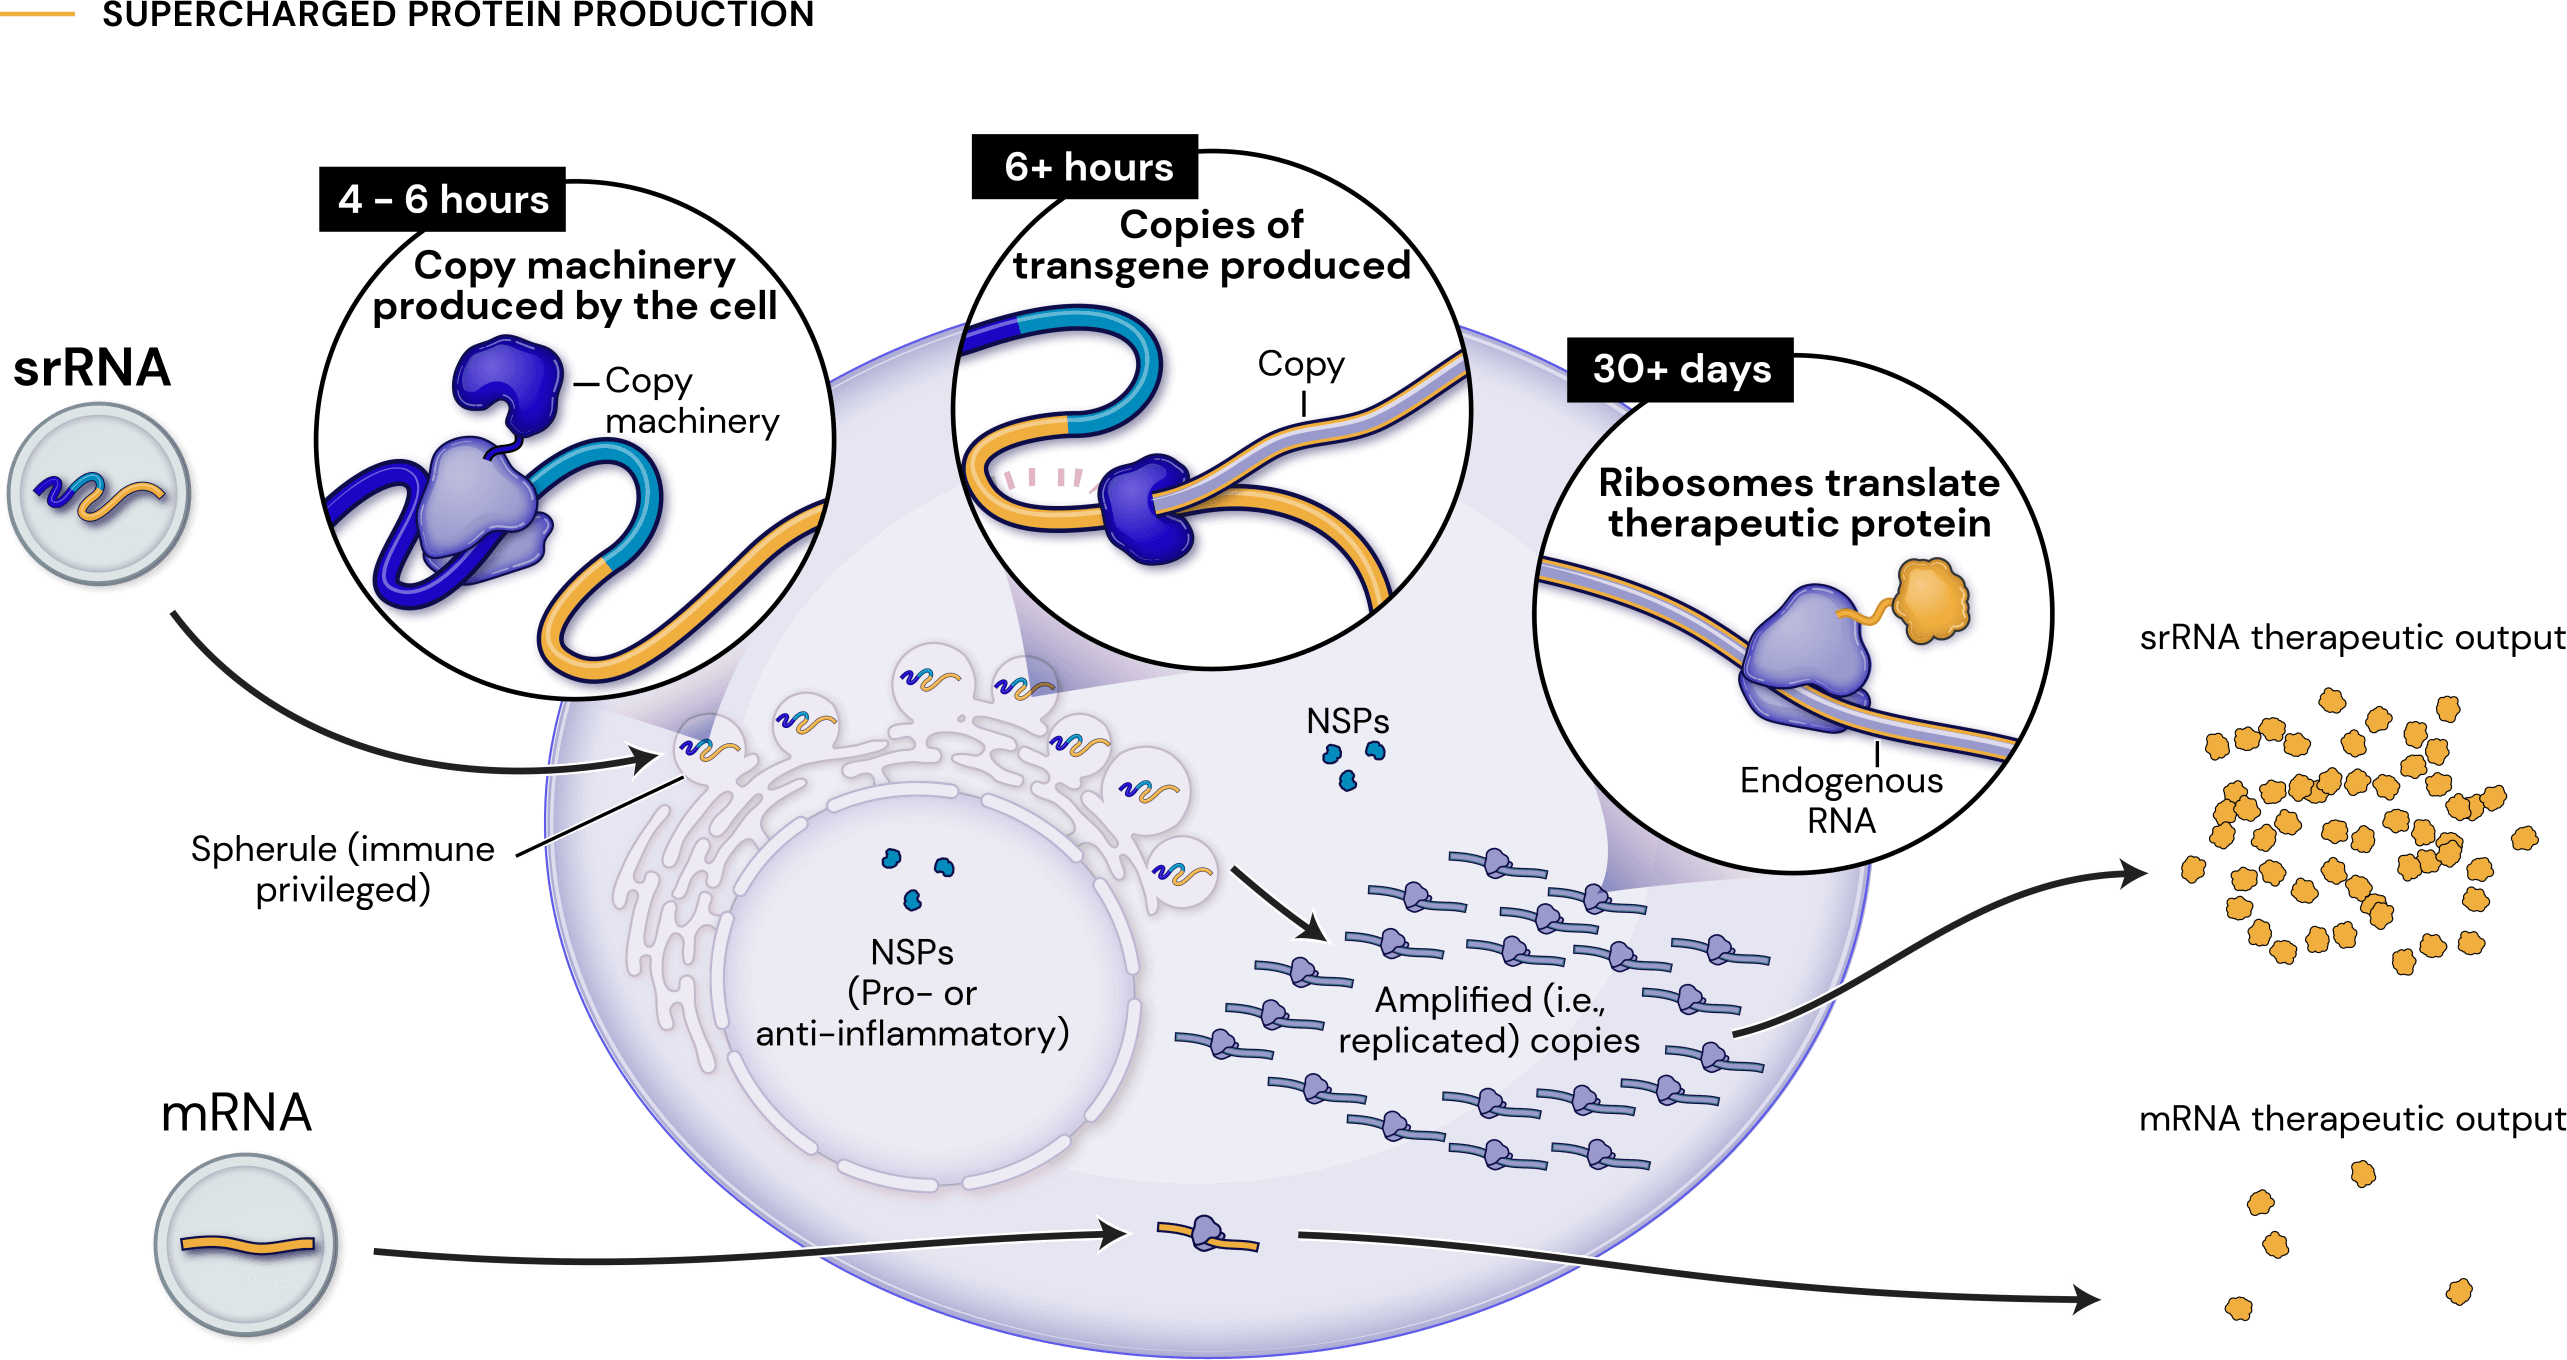 A scientific illustration shows in one light blue cell how srRNA is converted in the cell to massive therapeutic output, and how this compares to meager production from standard mRNA. On the top part of the cell, there are three white callout boxes outlining the steps between srRNA entering the cell and therapeutic output. In the leftmost, taking place between 4-6 hours of srRNA entry to the cell, copy machinery is produced by the cell. In the second callout box, 6+ hours after srRNA entry, copies of the transgene are produced. 30+ days later, ribosomes translate the therapeutic protein. This creates dozens of small yellow proteins. On the bottom part of the cell, mRNA enters the cell, is processed, and produces five therapeutic proteins.